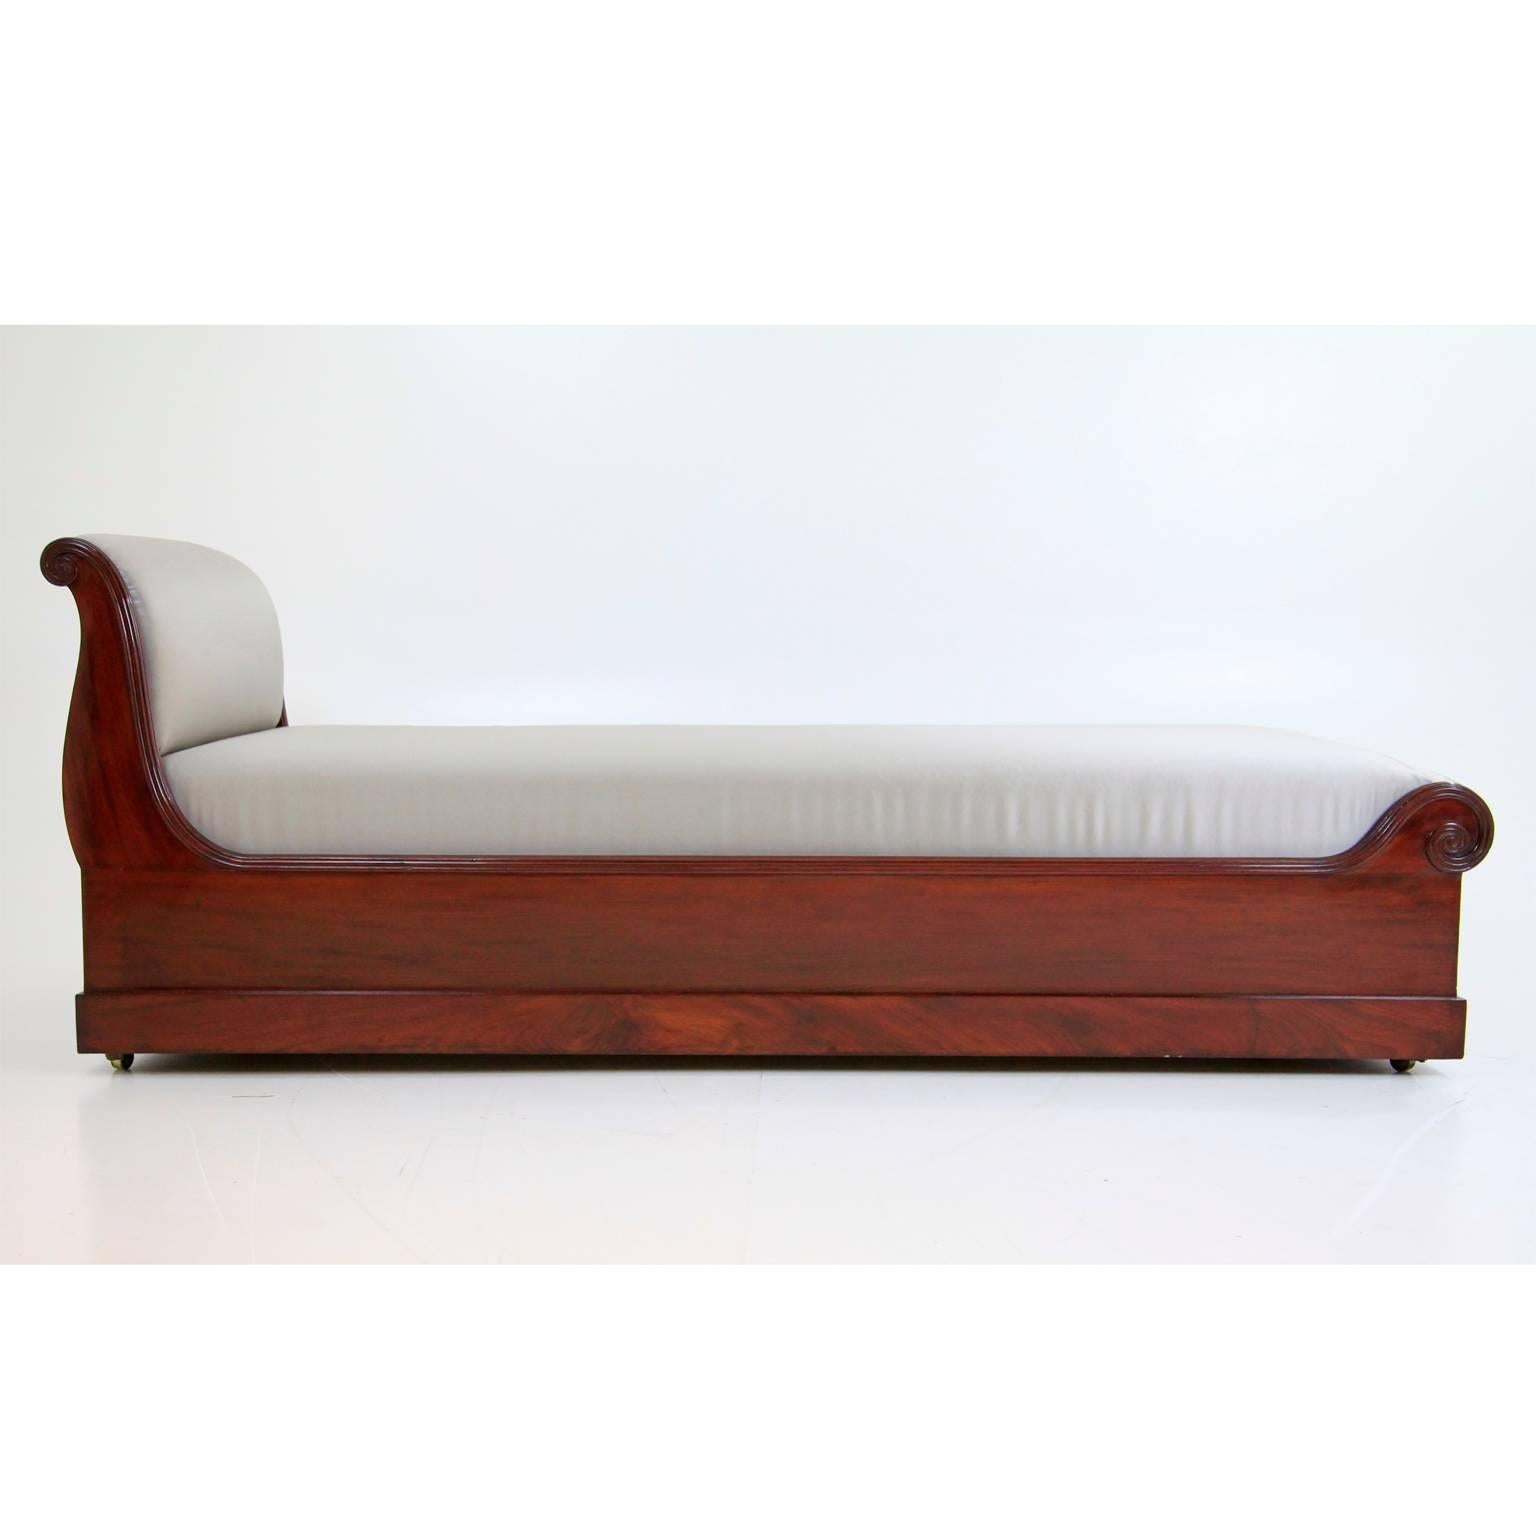 Elegant Biedermeier mahogany recamiere with a newly upholstered, grey satin cover and an S-shaped backrest. The chaise longue has a fluted edge, ending in scrolls and stands on little rolls.